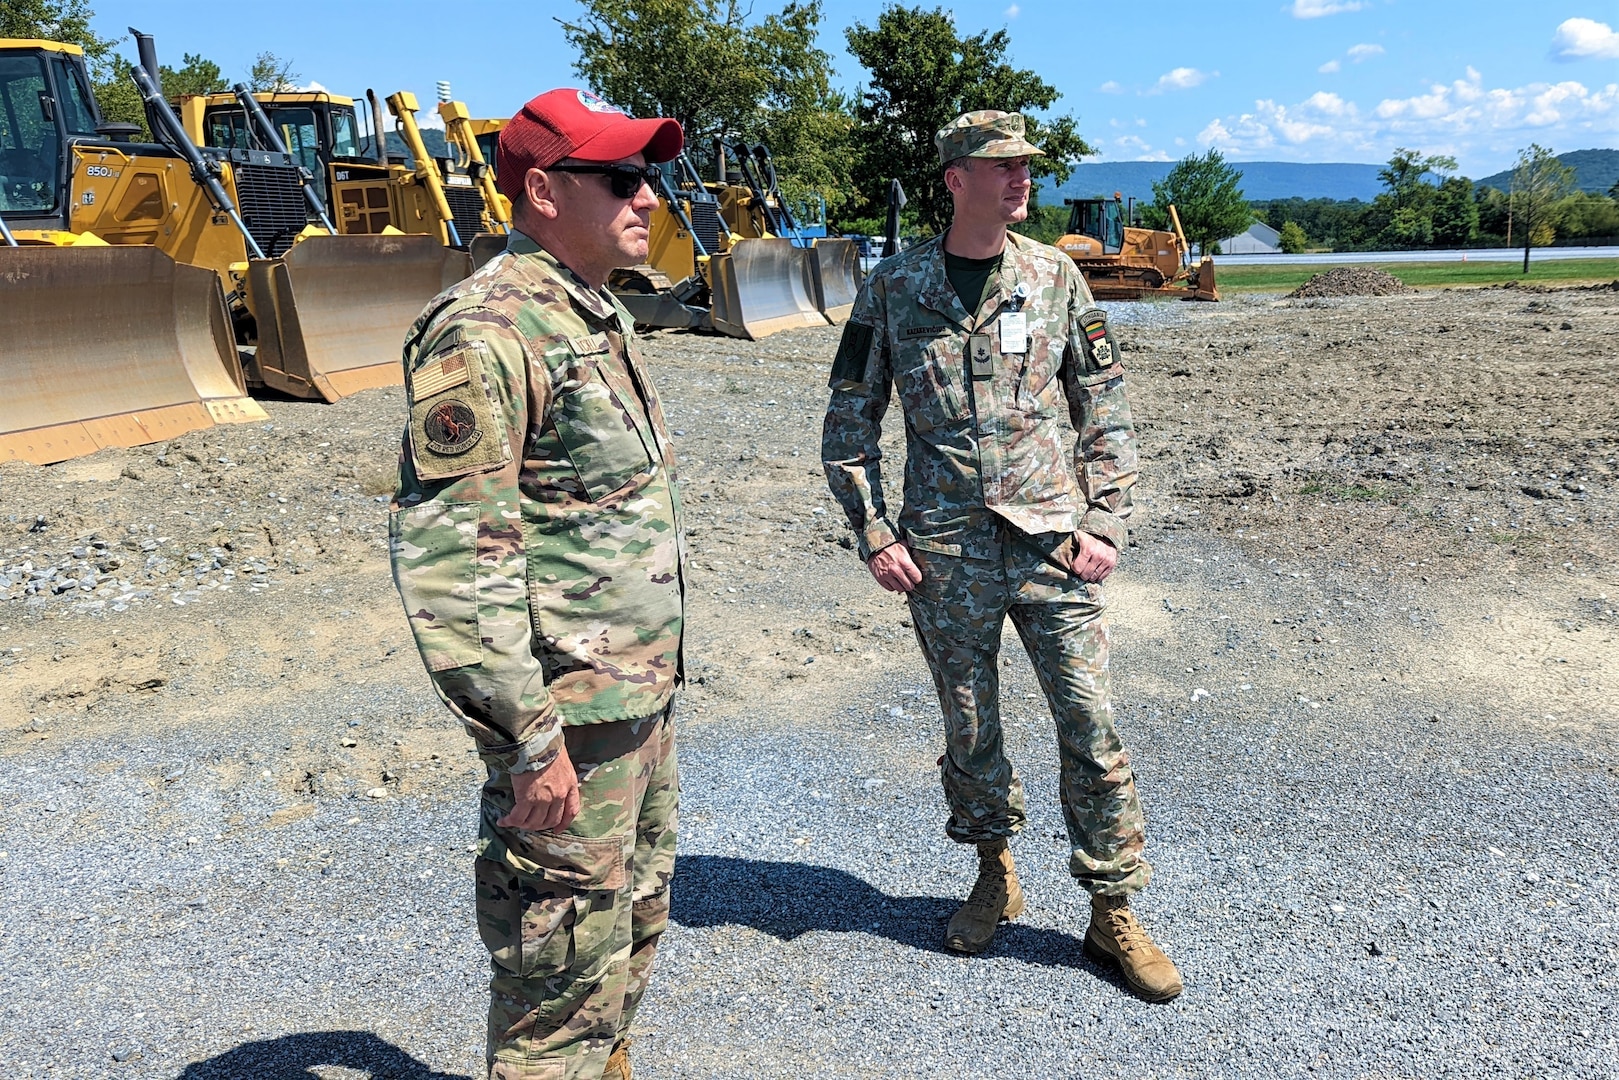 Maj. Mantas Kazakevičius, right, Lithuanian Armed Forces liaison officer to the Pennsylvania National Guard, met with Pennsylvania Air National Guard engineers and senior leaders Aug. 24, 2022, at Fort Indiantown Gap, Pa. The Pennsylvania Guard and Lithuania have been partners under the Department of Defense National Guard Bureau State Partnership Program since 1993.